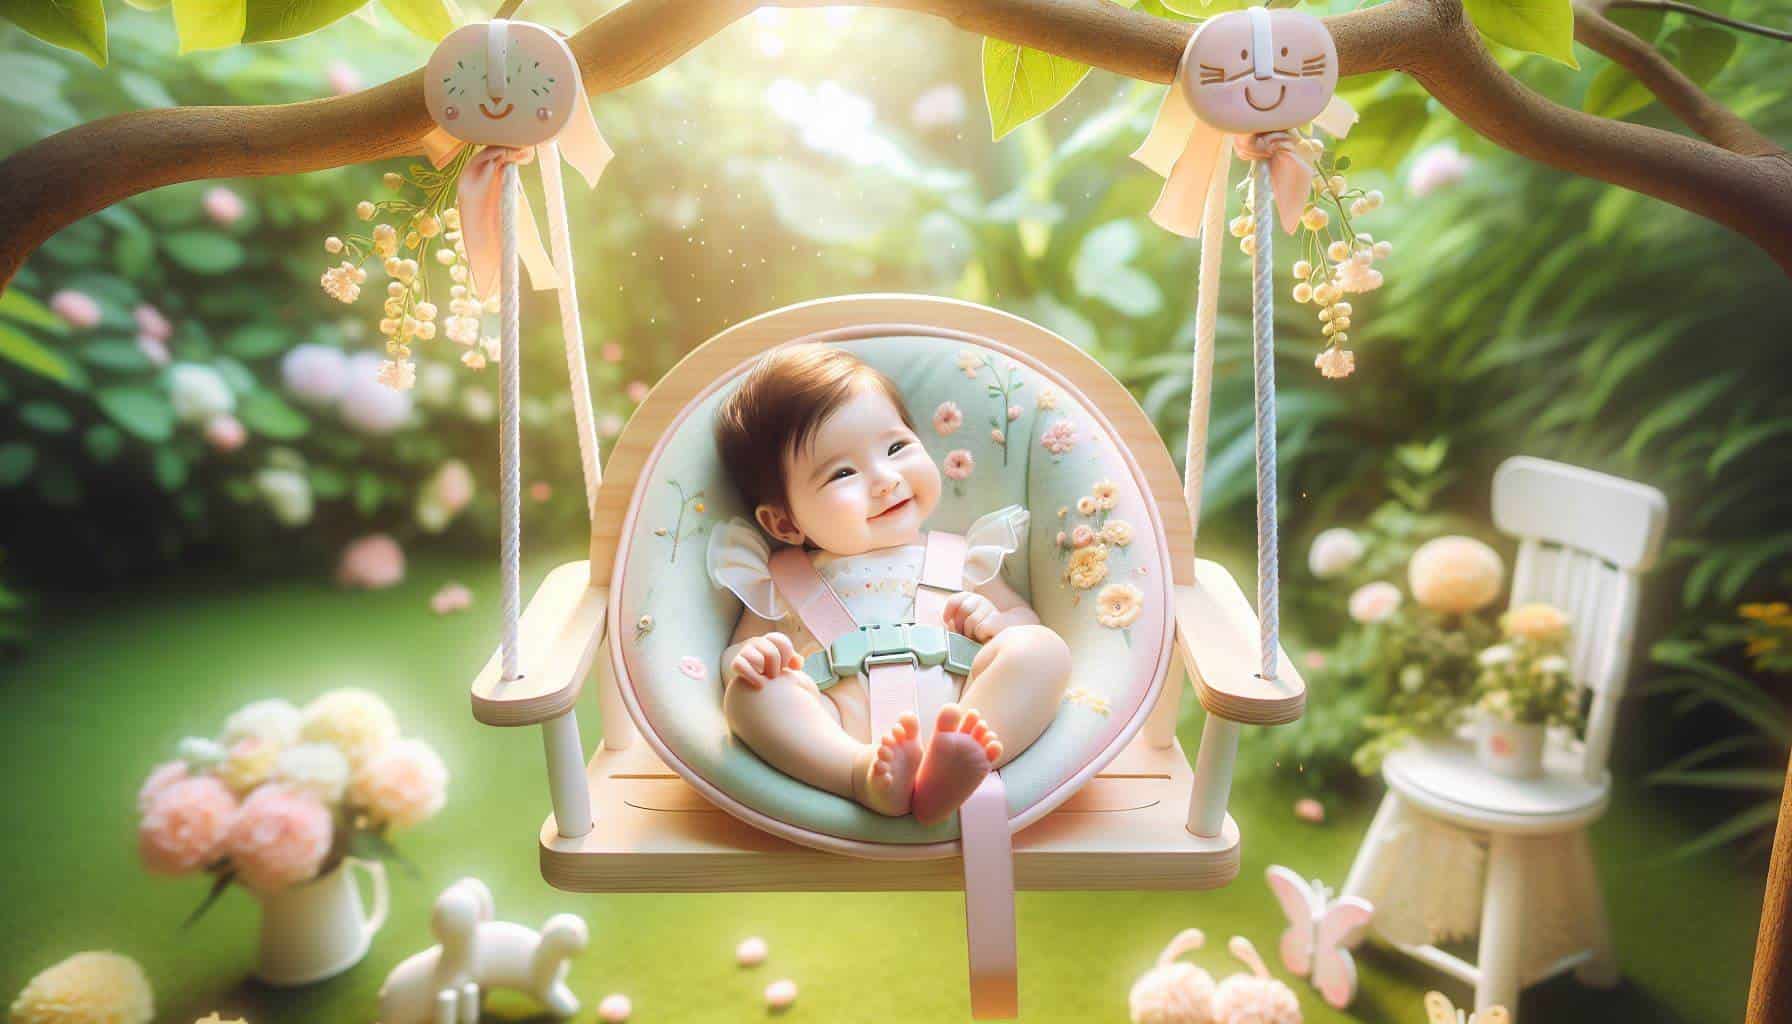 Baby swinging in an outdoor baby swing with  a chair and flowers nearby